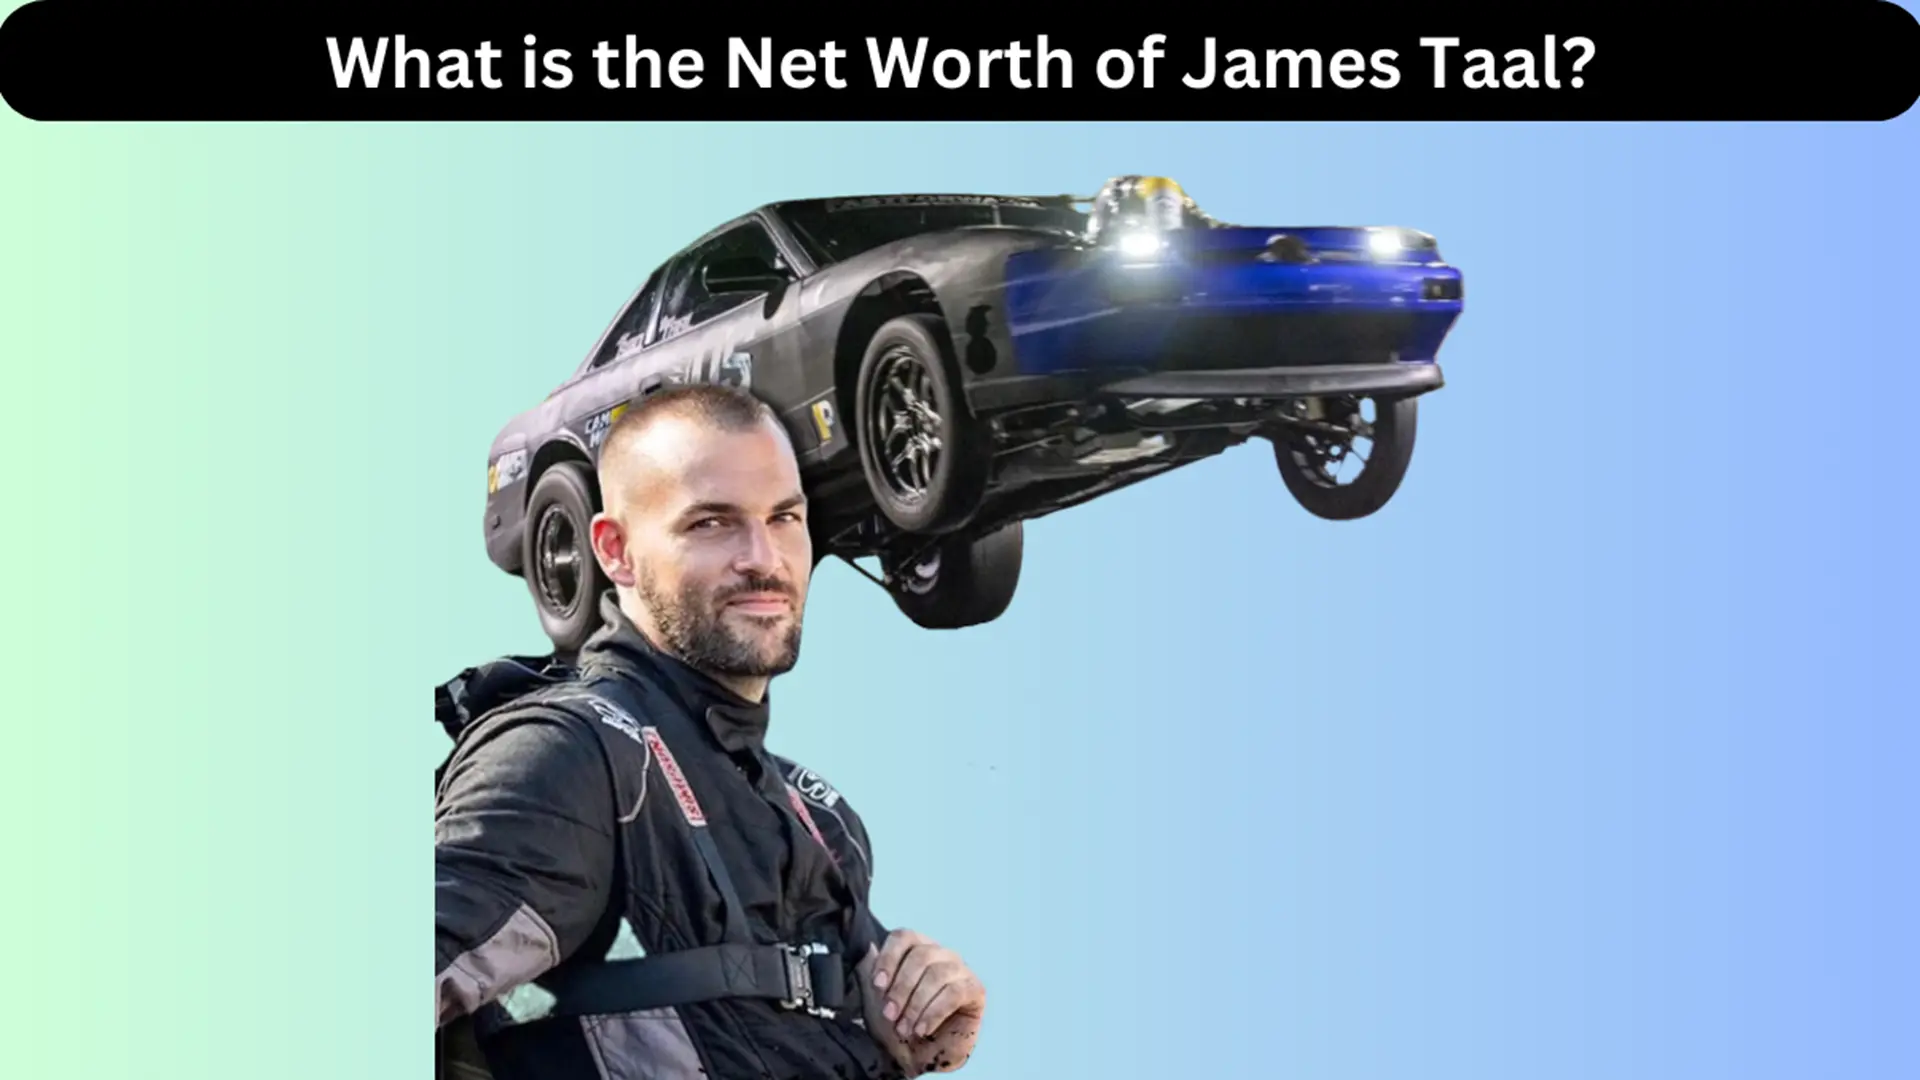 What is the Net Worth of James Taal